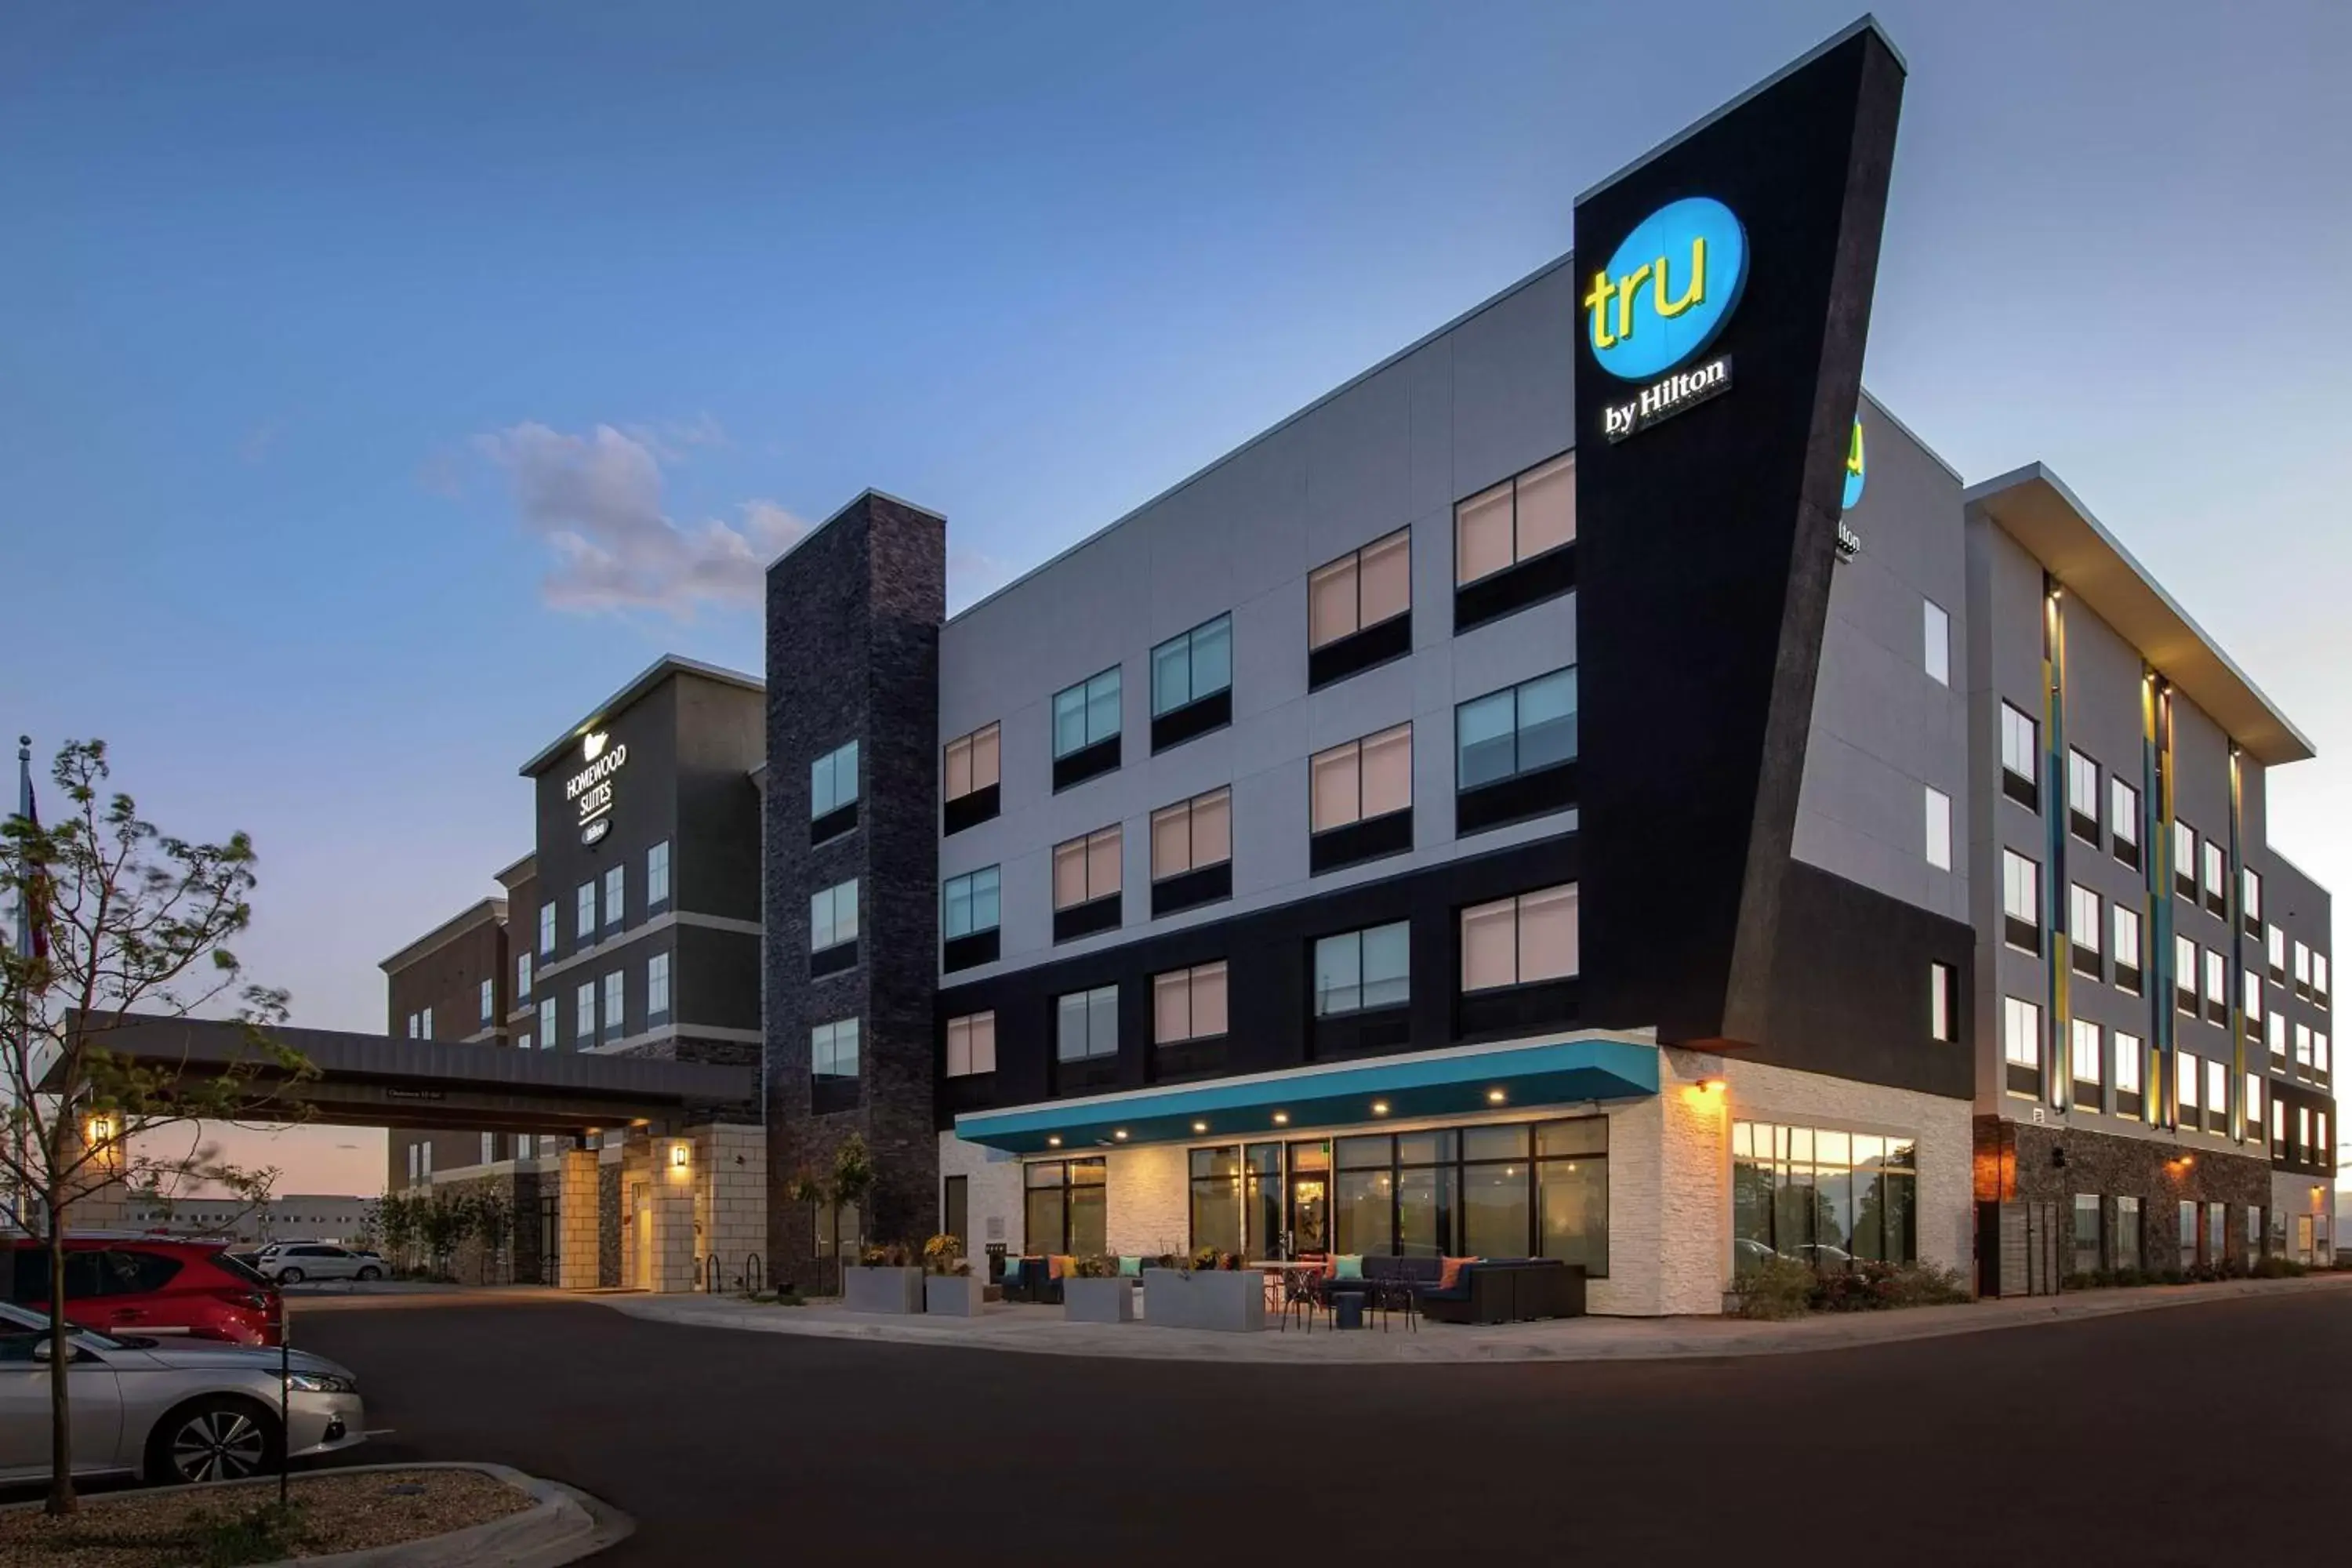 Property Building in Tru By Hilton Denver Airport Tower Road